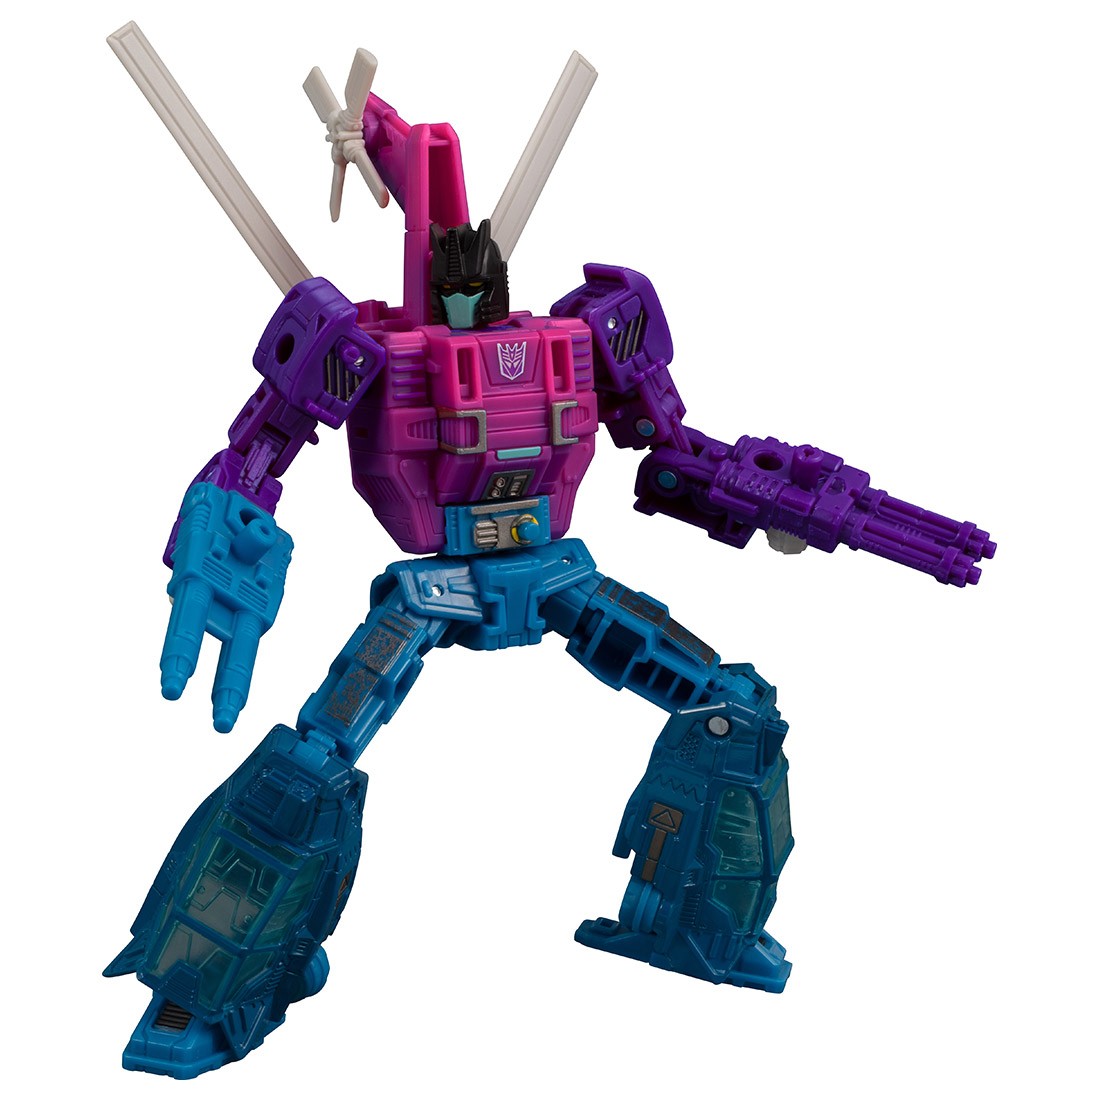 New Transformers War For Cybertron Siege Rumble & Ratbat in stock 